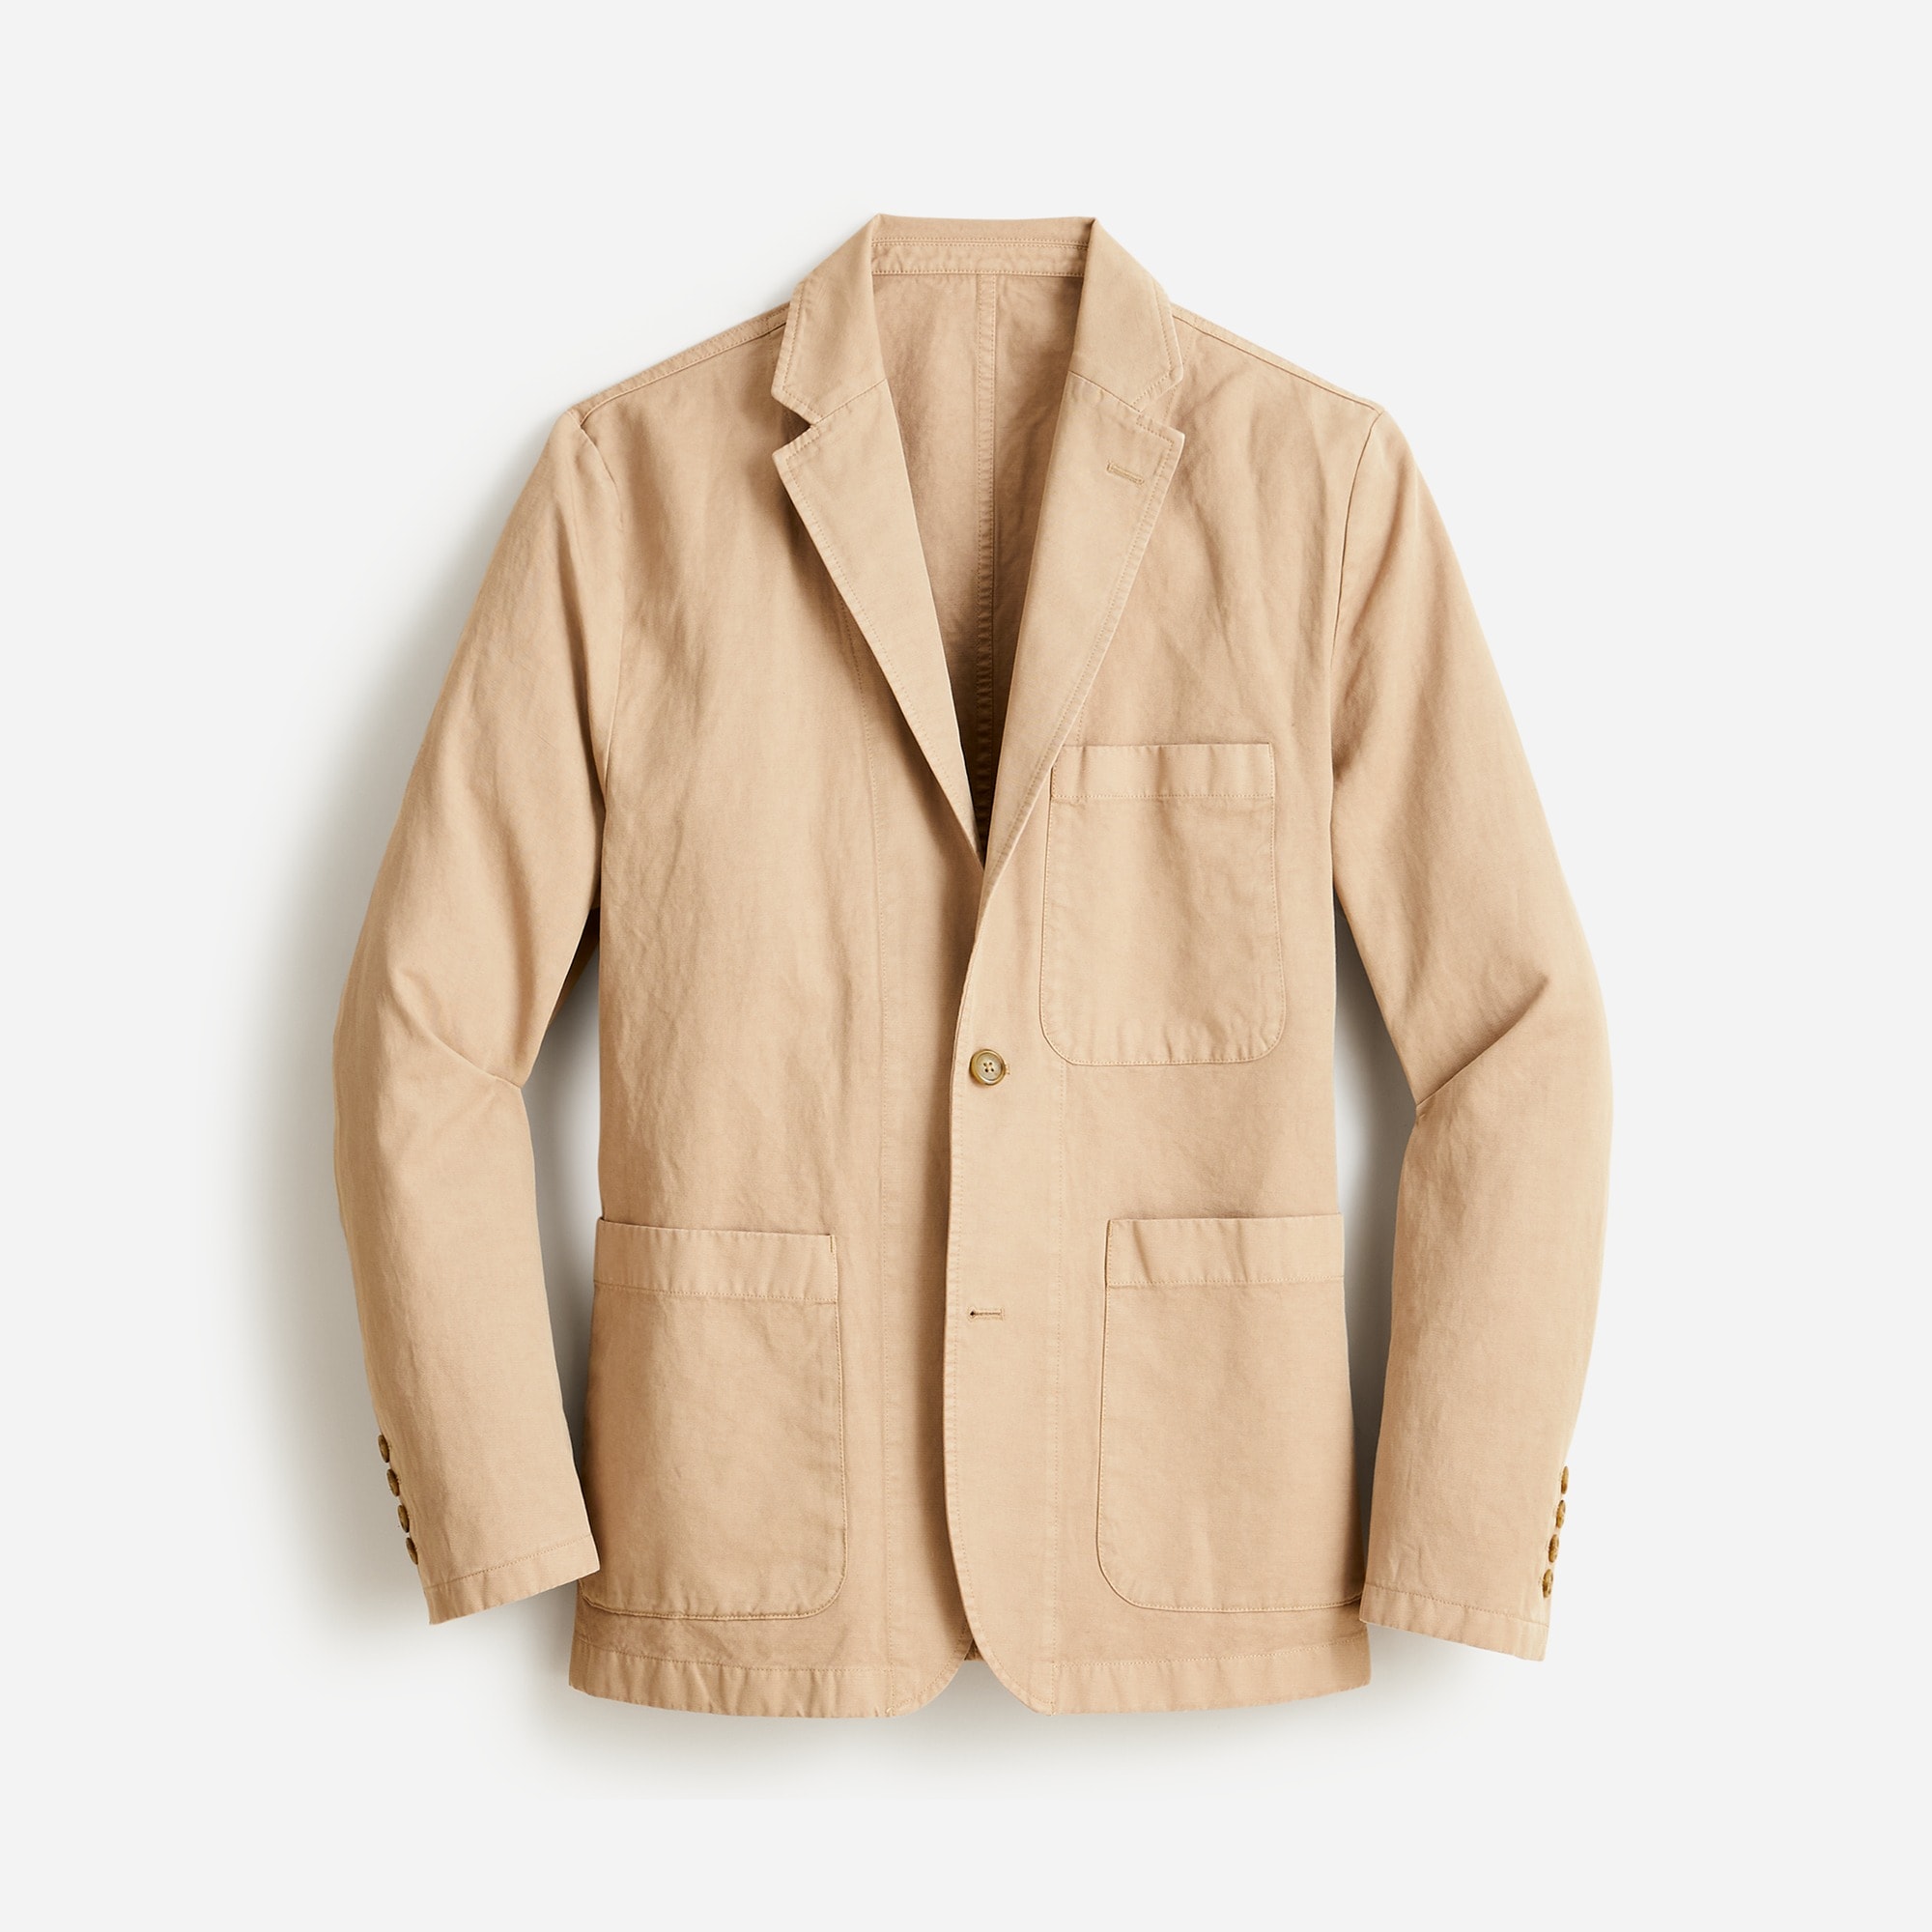  Garment-dyed cotton-linen chino suit jacket